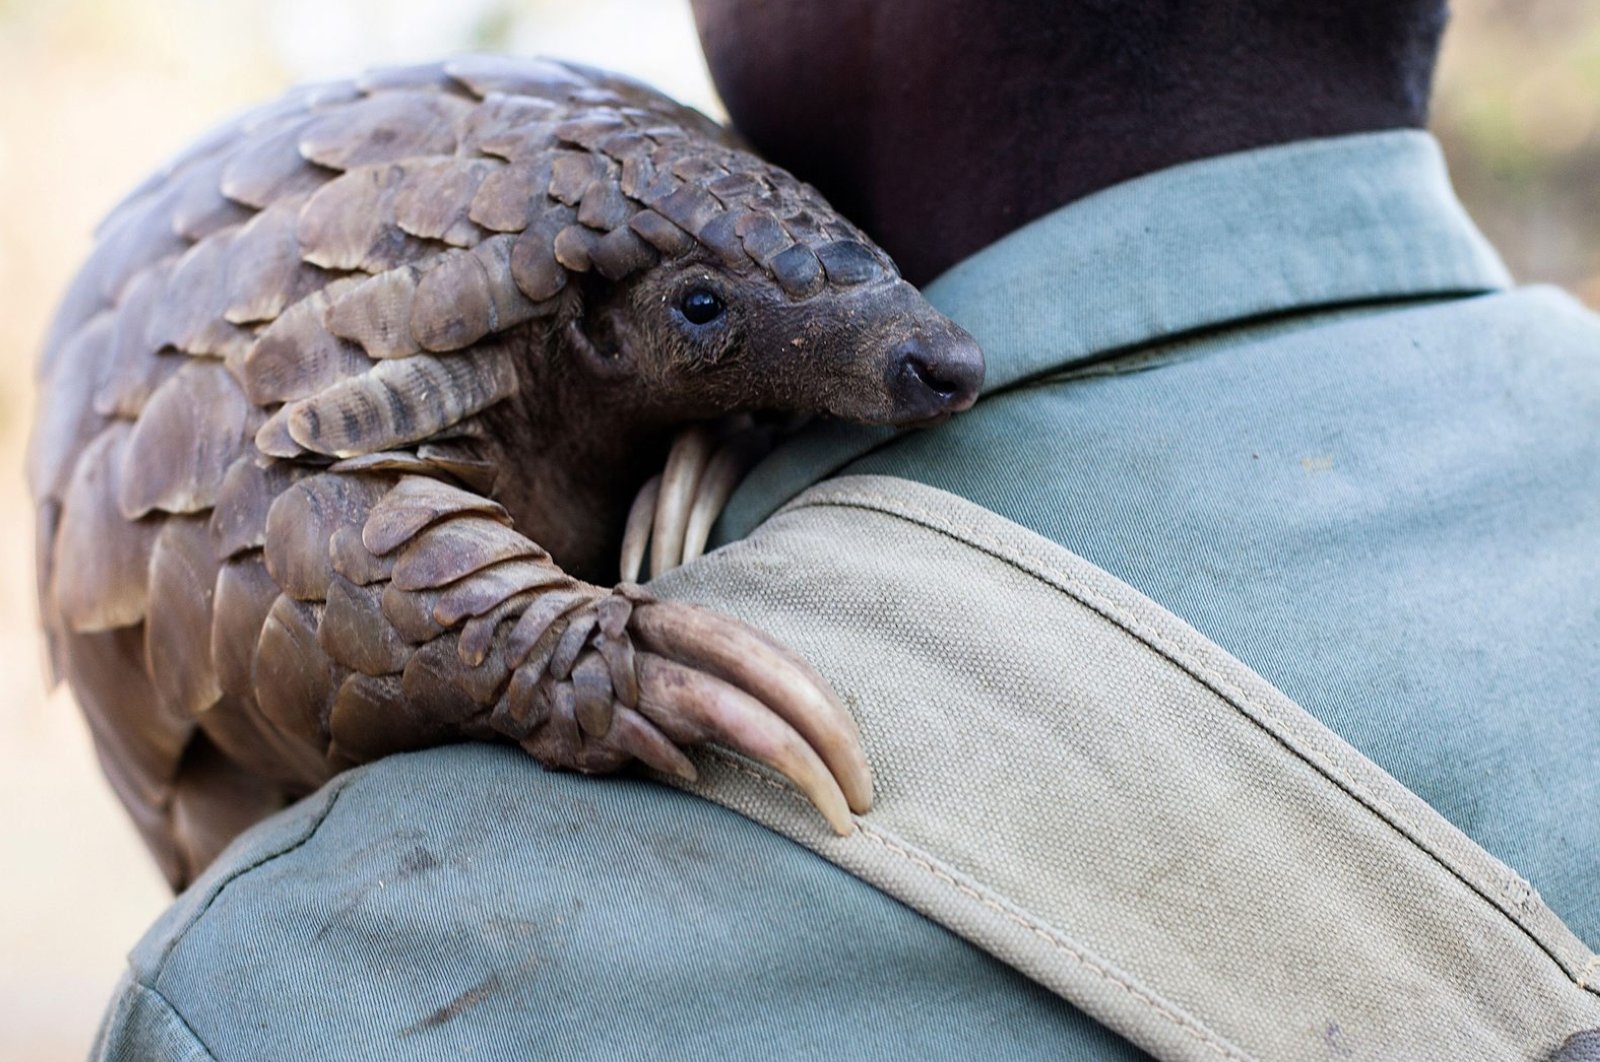 Zimbabwe game reserve guide Matius Mhambe holds "Marimba", a female pangolin weighing 10kgs that has been nine years in care at Wild Is Life animal sanctuary just outside the country's capital Harare, on September 22, 2016. (APF Photo)